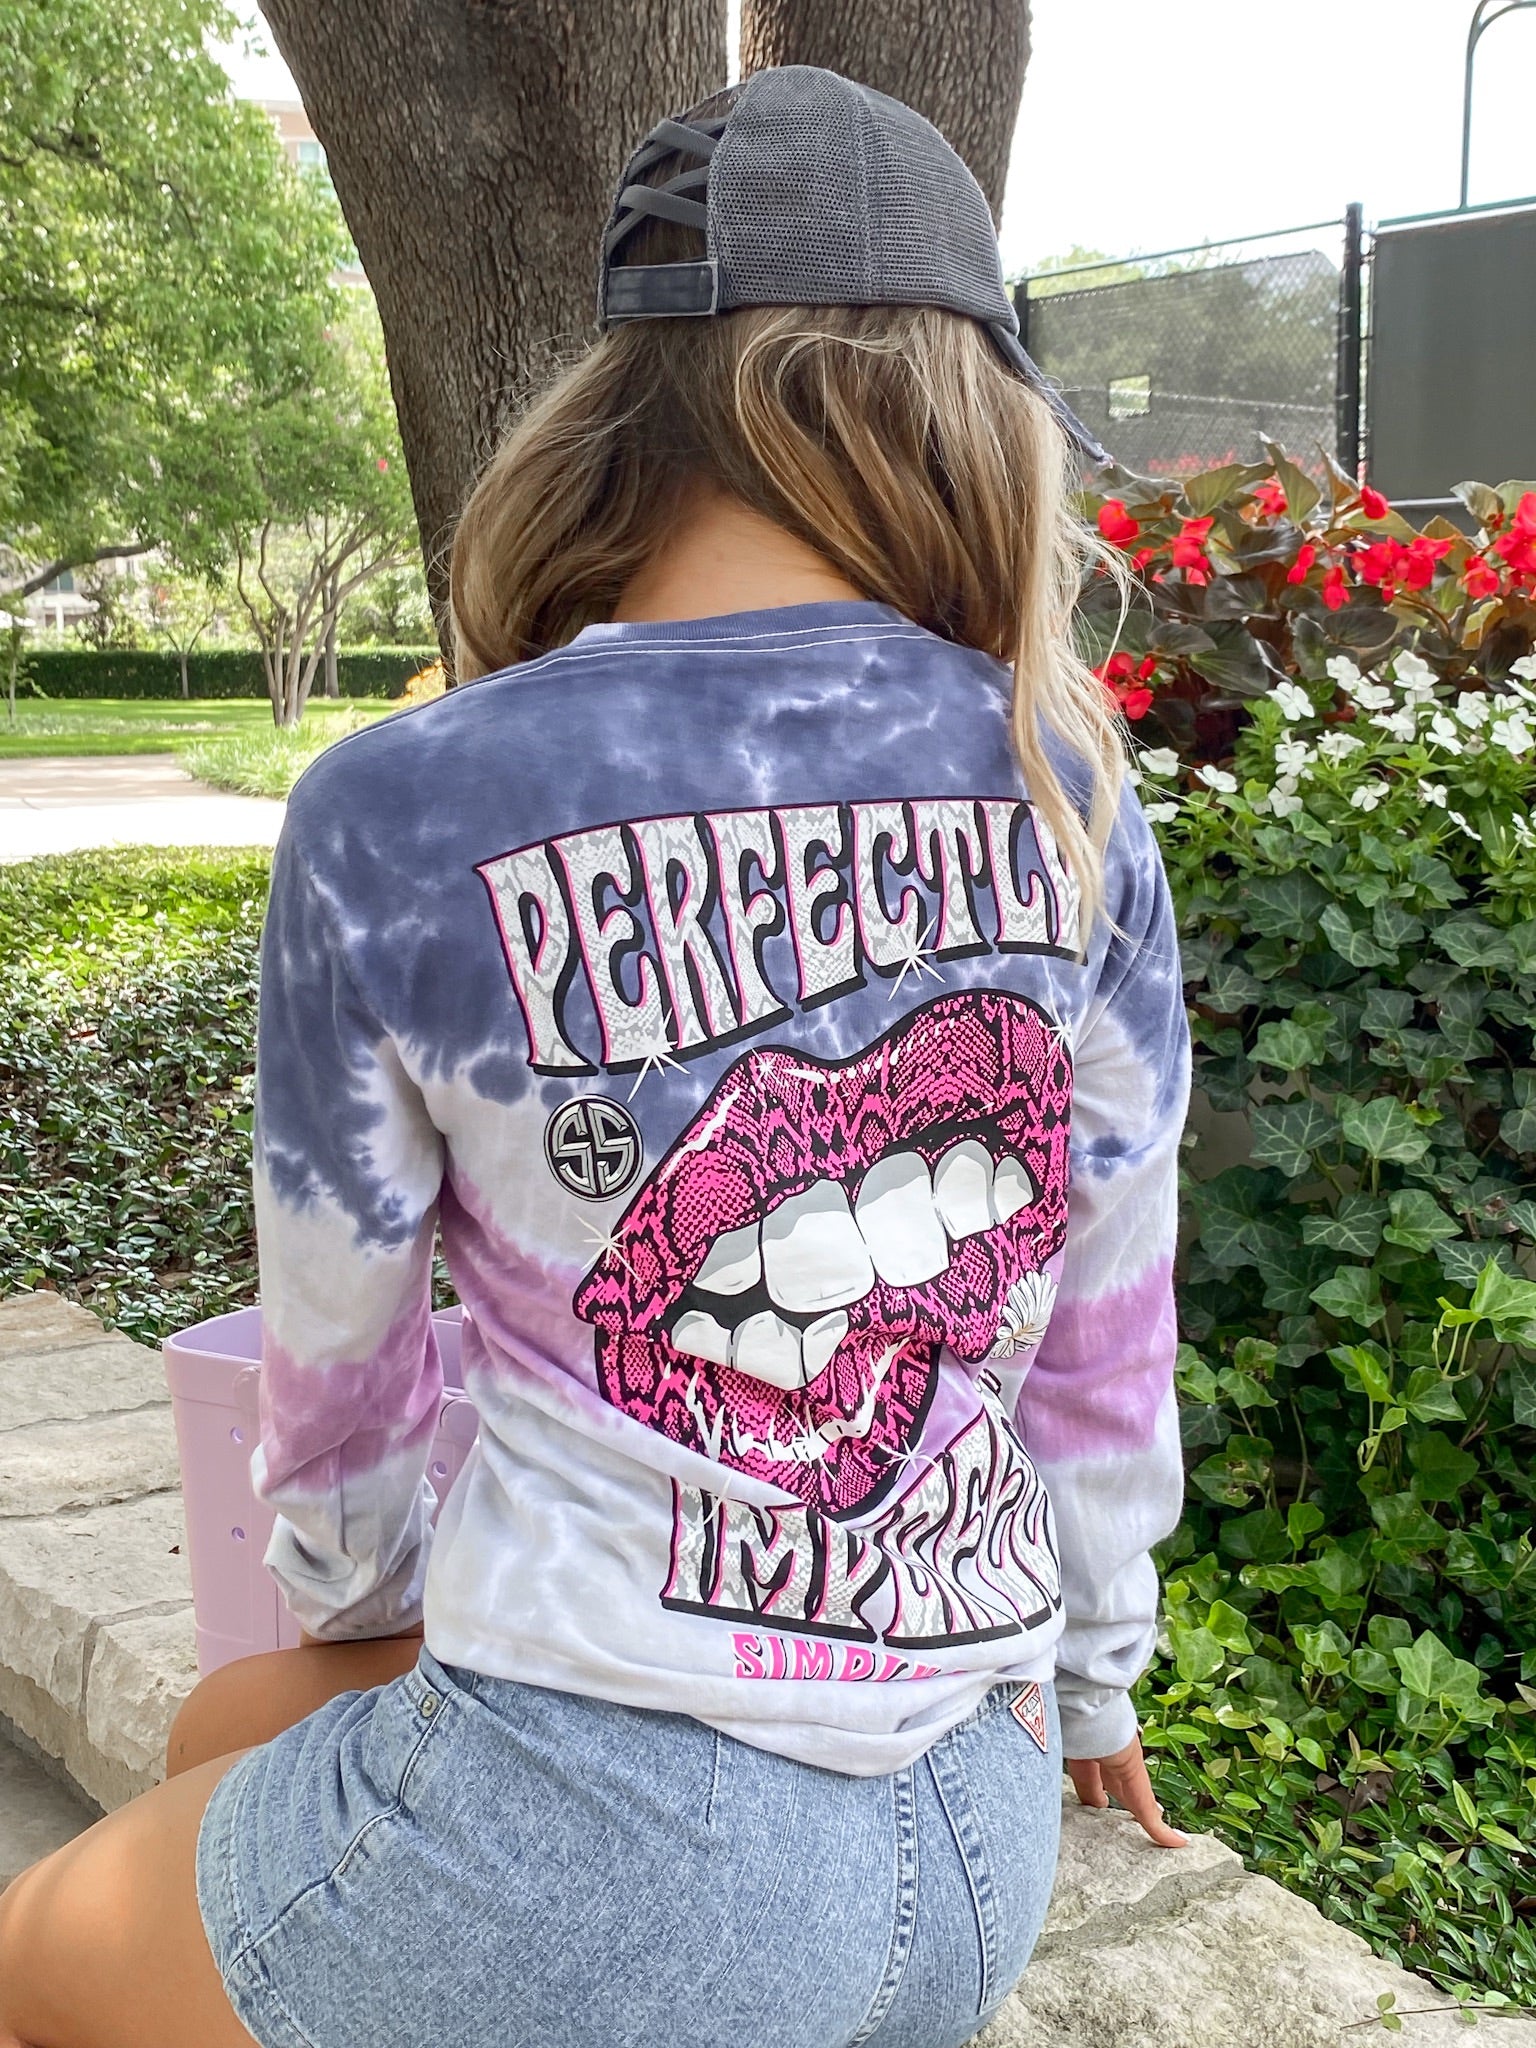 'Perfectly Imperfect' Snakeskin Lips Tie Dye Long Sleeve Tee by Simply Southern